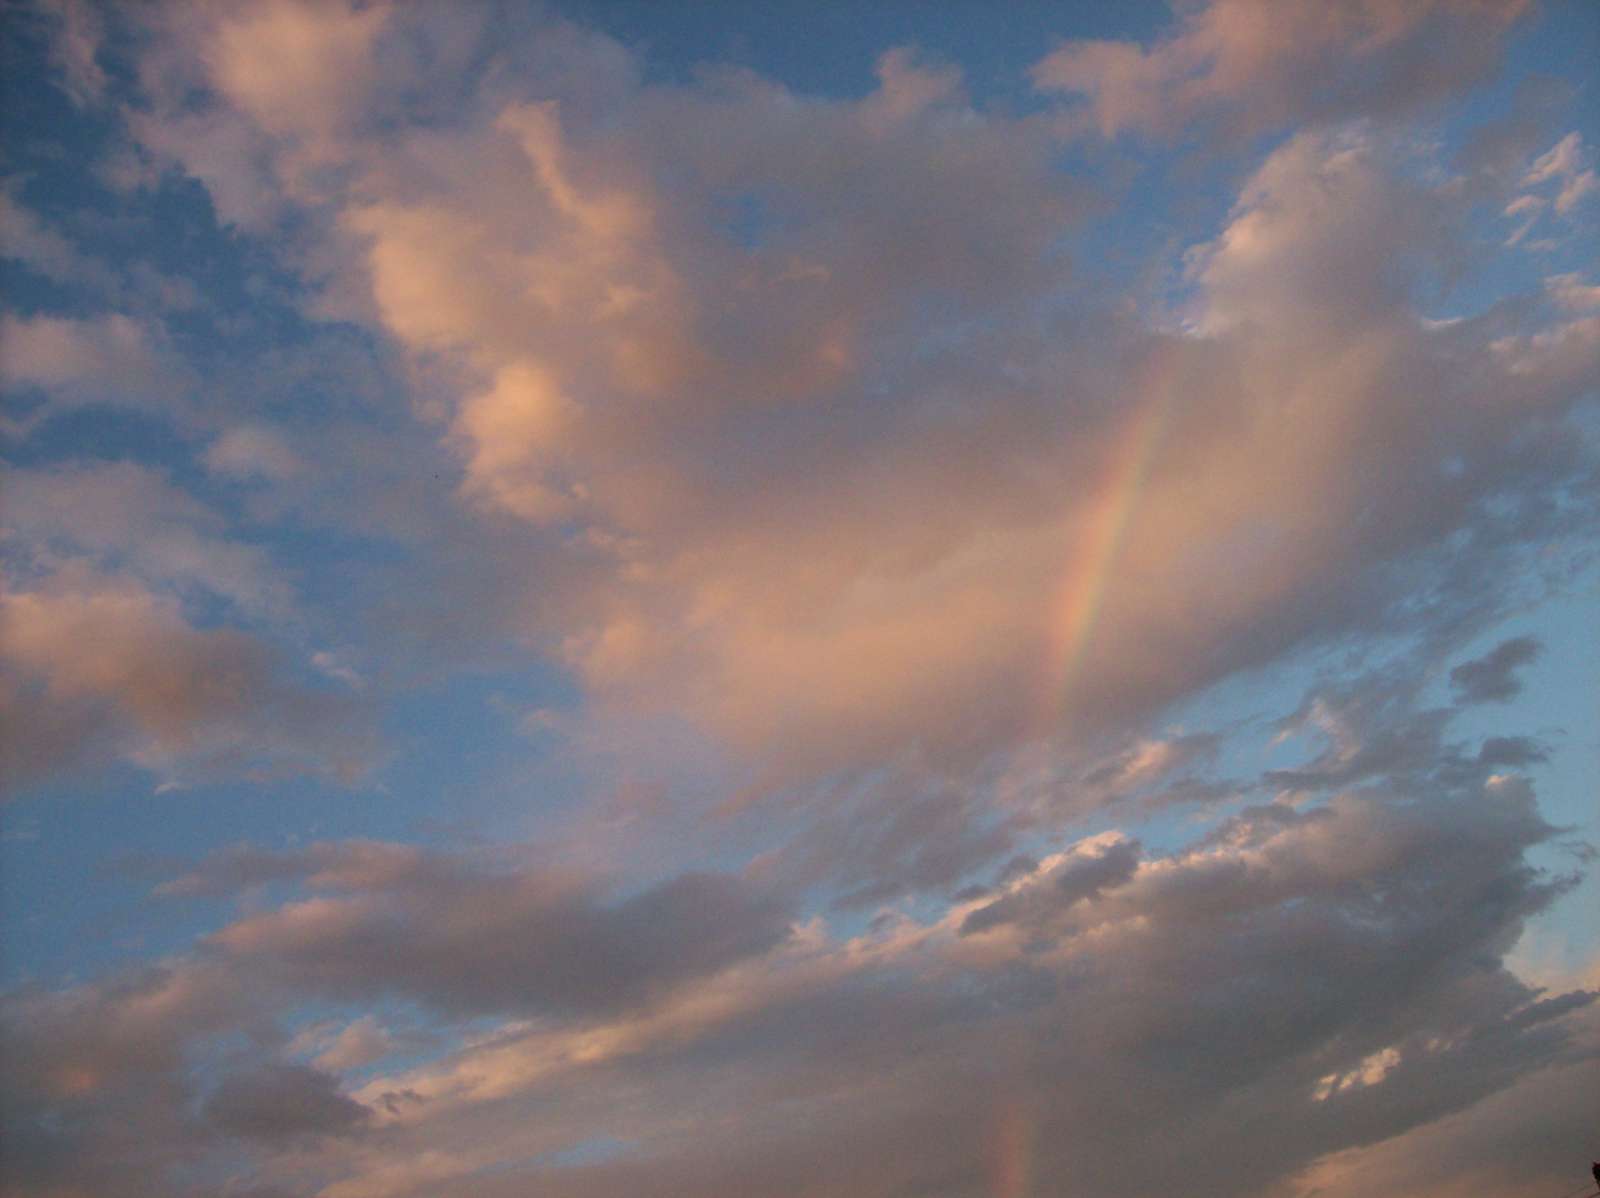 Clouds with rainbow over Bagnarola: 71 KB; click on the image to enlarge